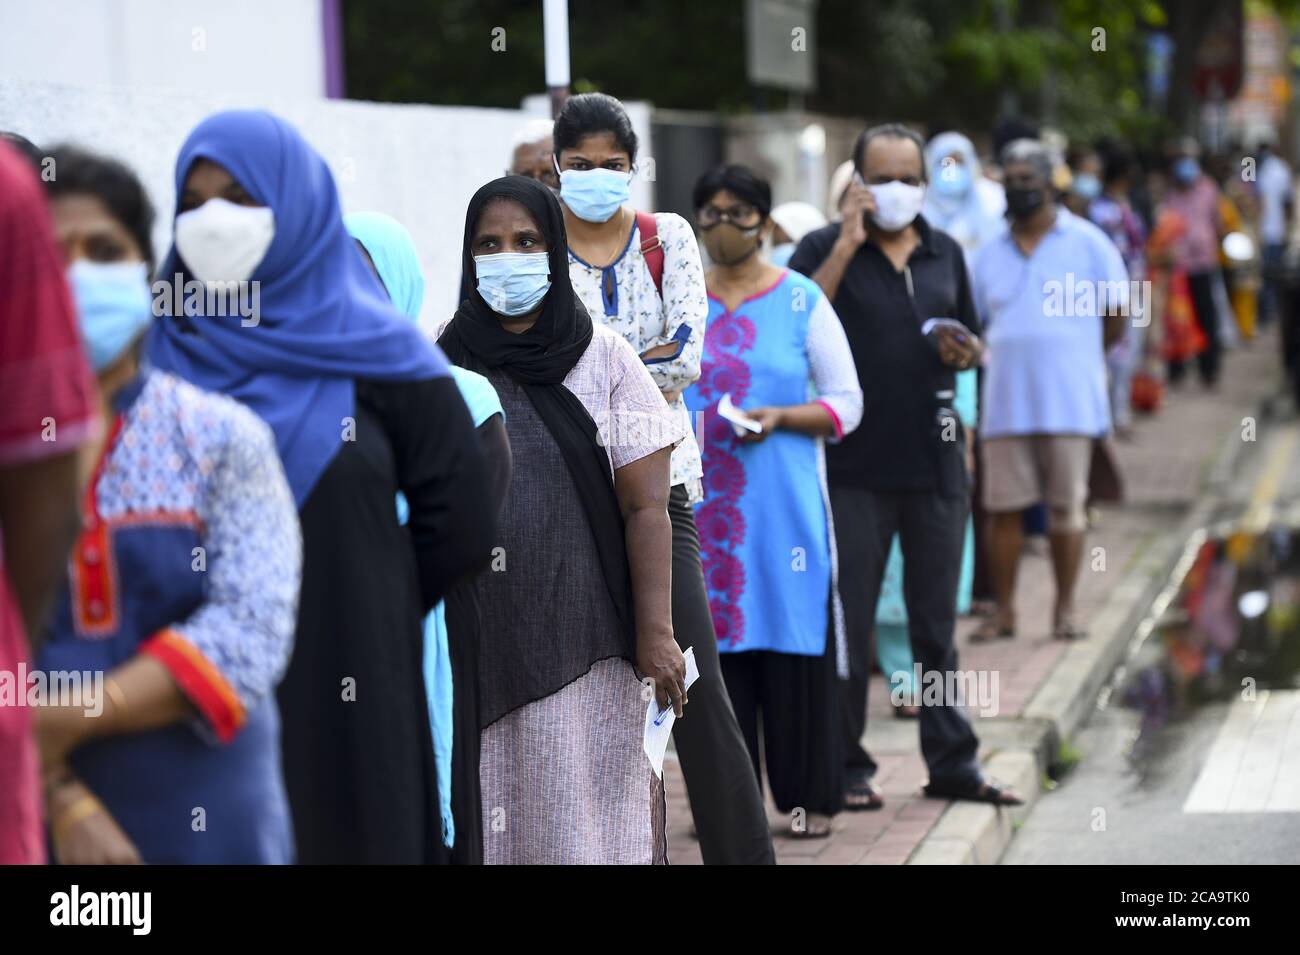 Colombo, Sri 5th Aug, 2020. Voters wait line to cast their ballots at a polling station Colombo, Sri Lanka, Aug. 5, 2020. An estimated 40 percent voter turnout was